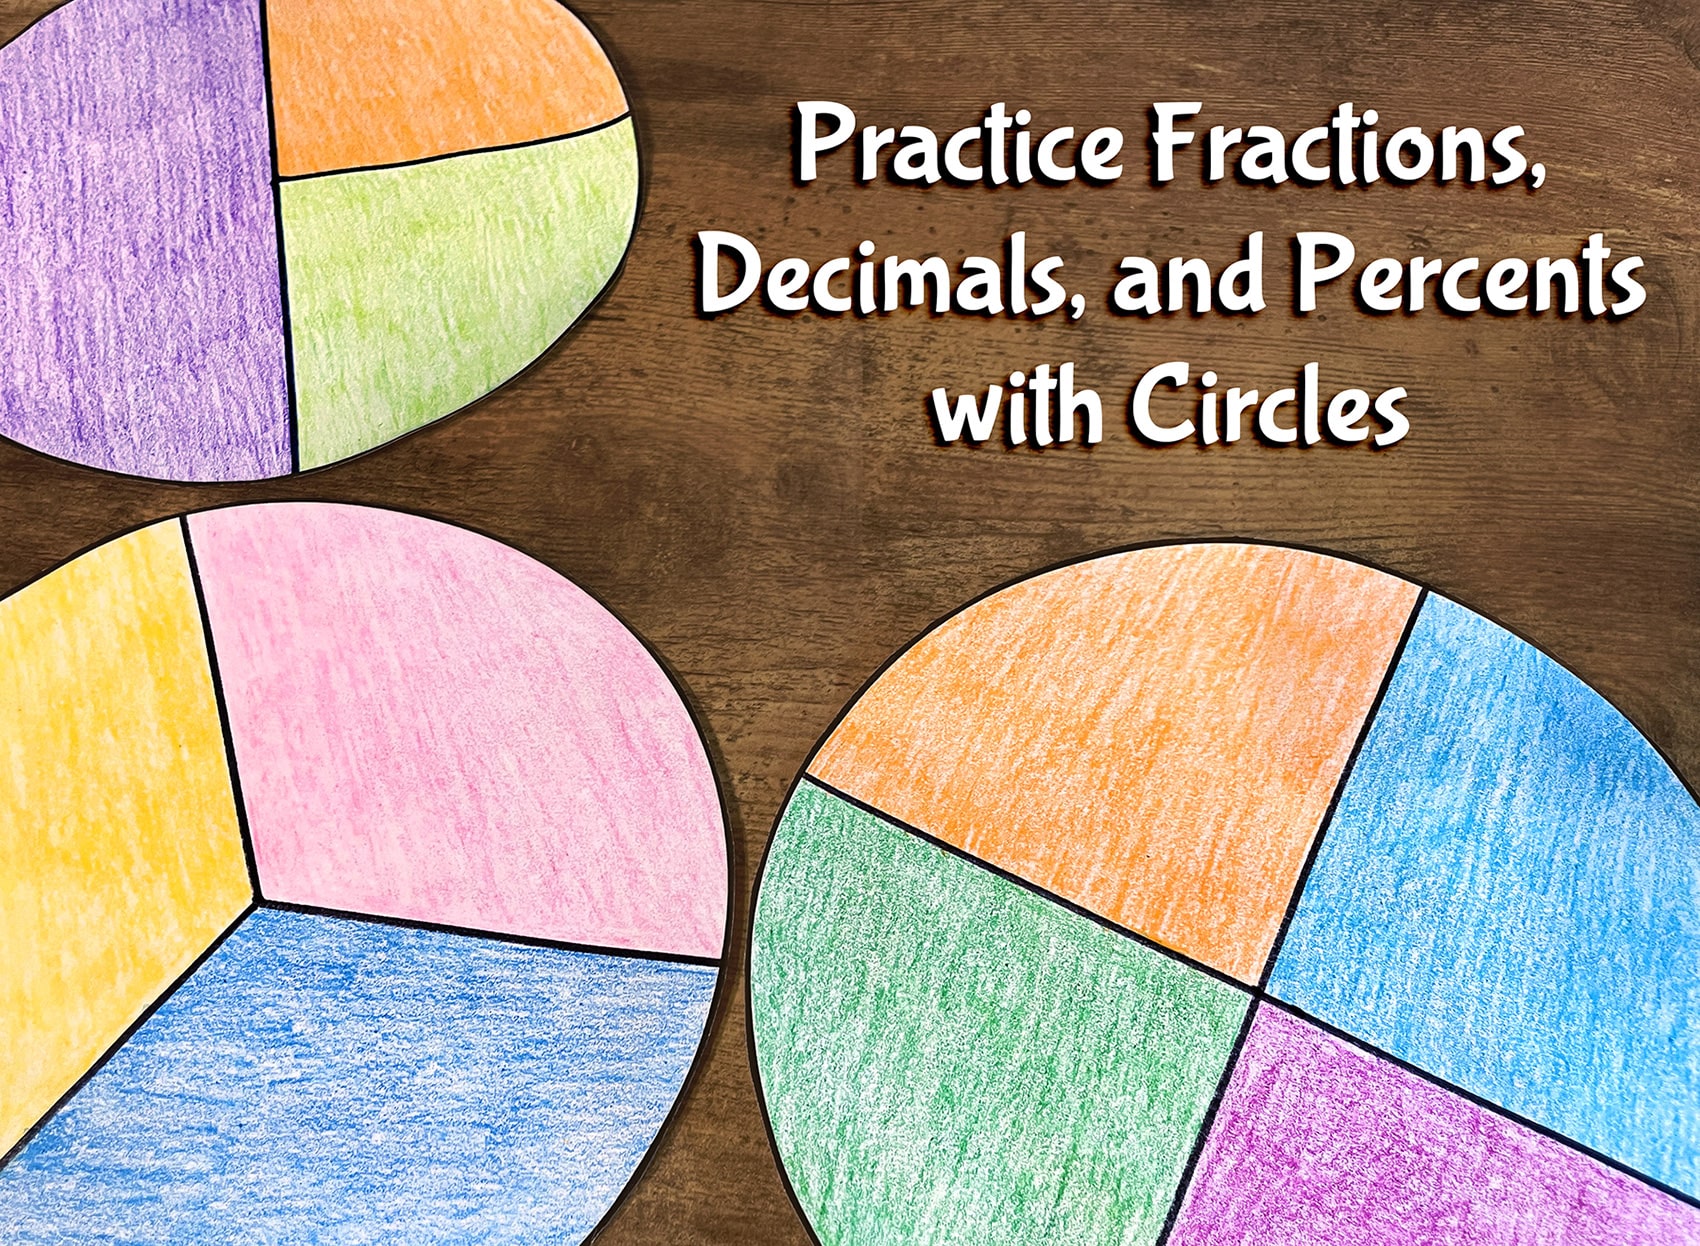 Use Circles to Practice Fractions, Decimals, and Percents 